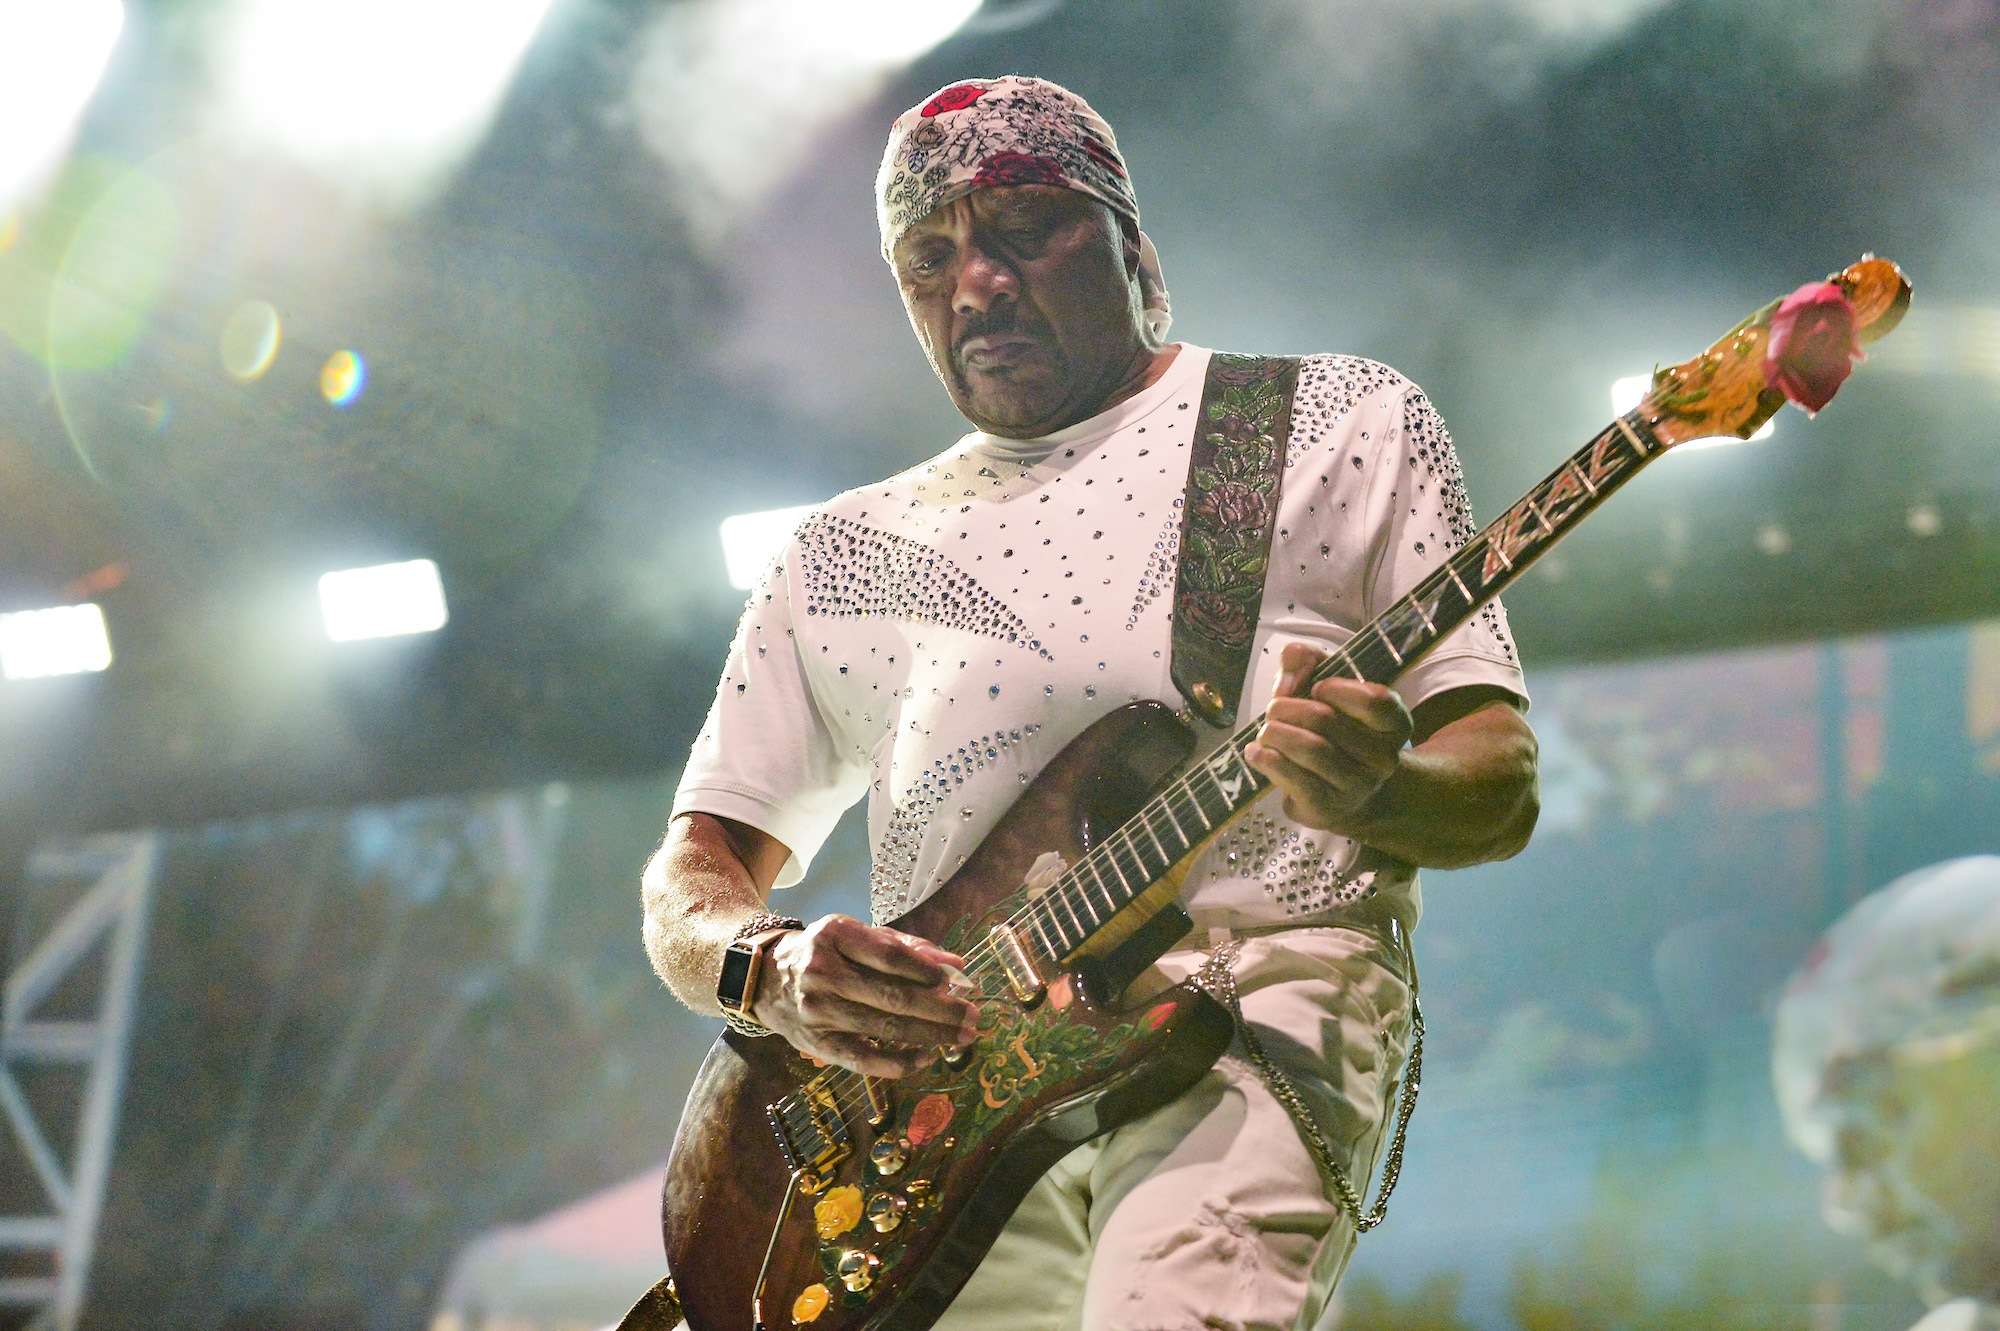 The Isley Brothers Live at Pitchfork [GALLERY] 6